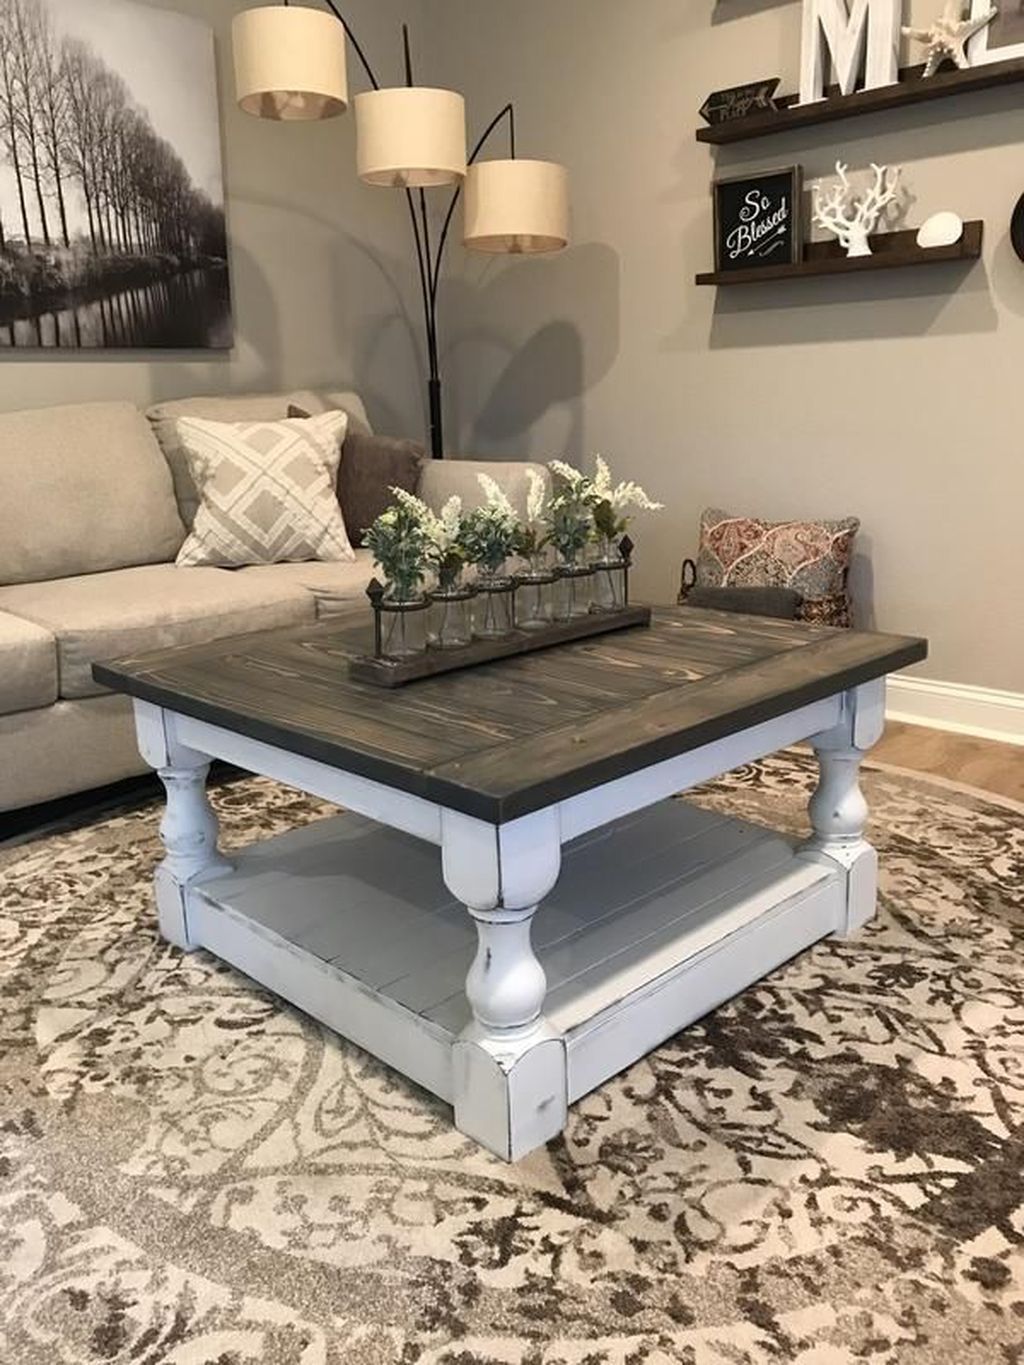 30+ Rustic Farmhouse Table Ideas To Use In The Decor | Farmhouse Style Intended For Living Room Farmhouse Coffee Tables (View 7 of 20)